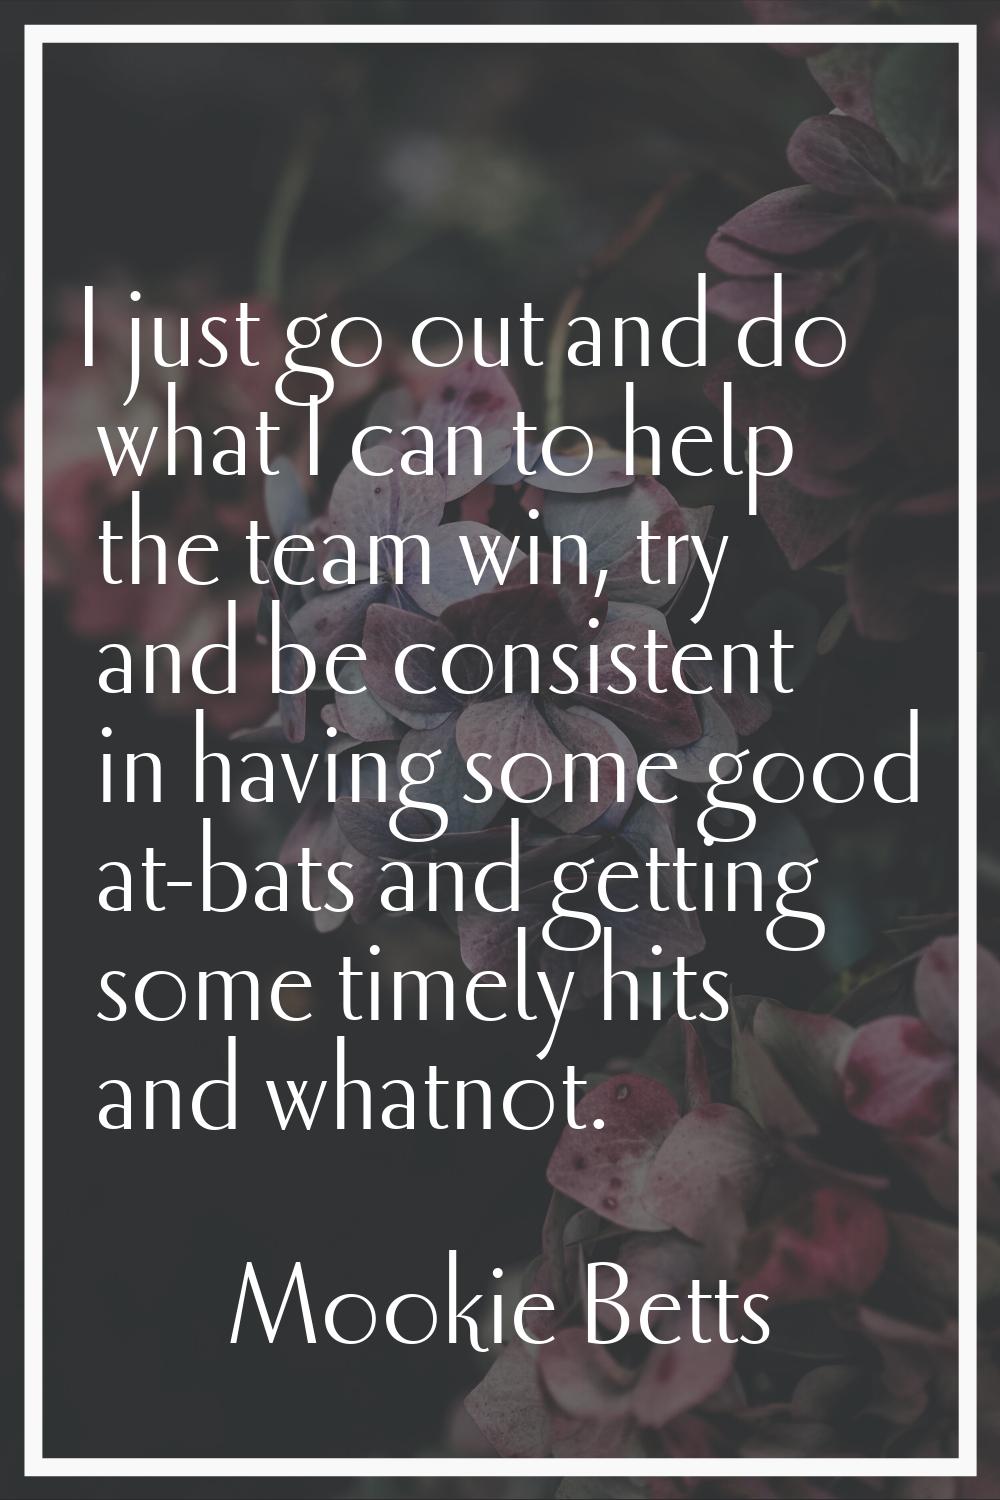 I just go out and do what I can to help the team win, try and be consistent in having some good at-